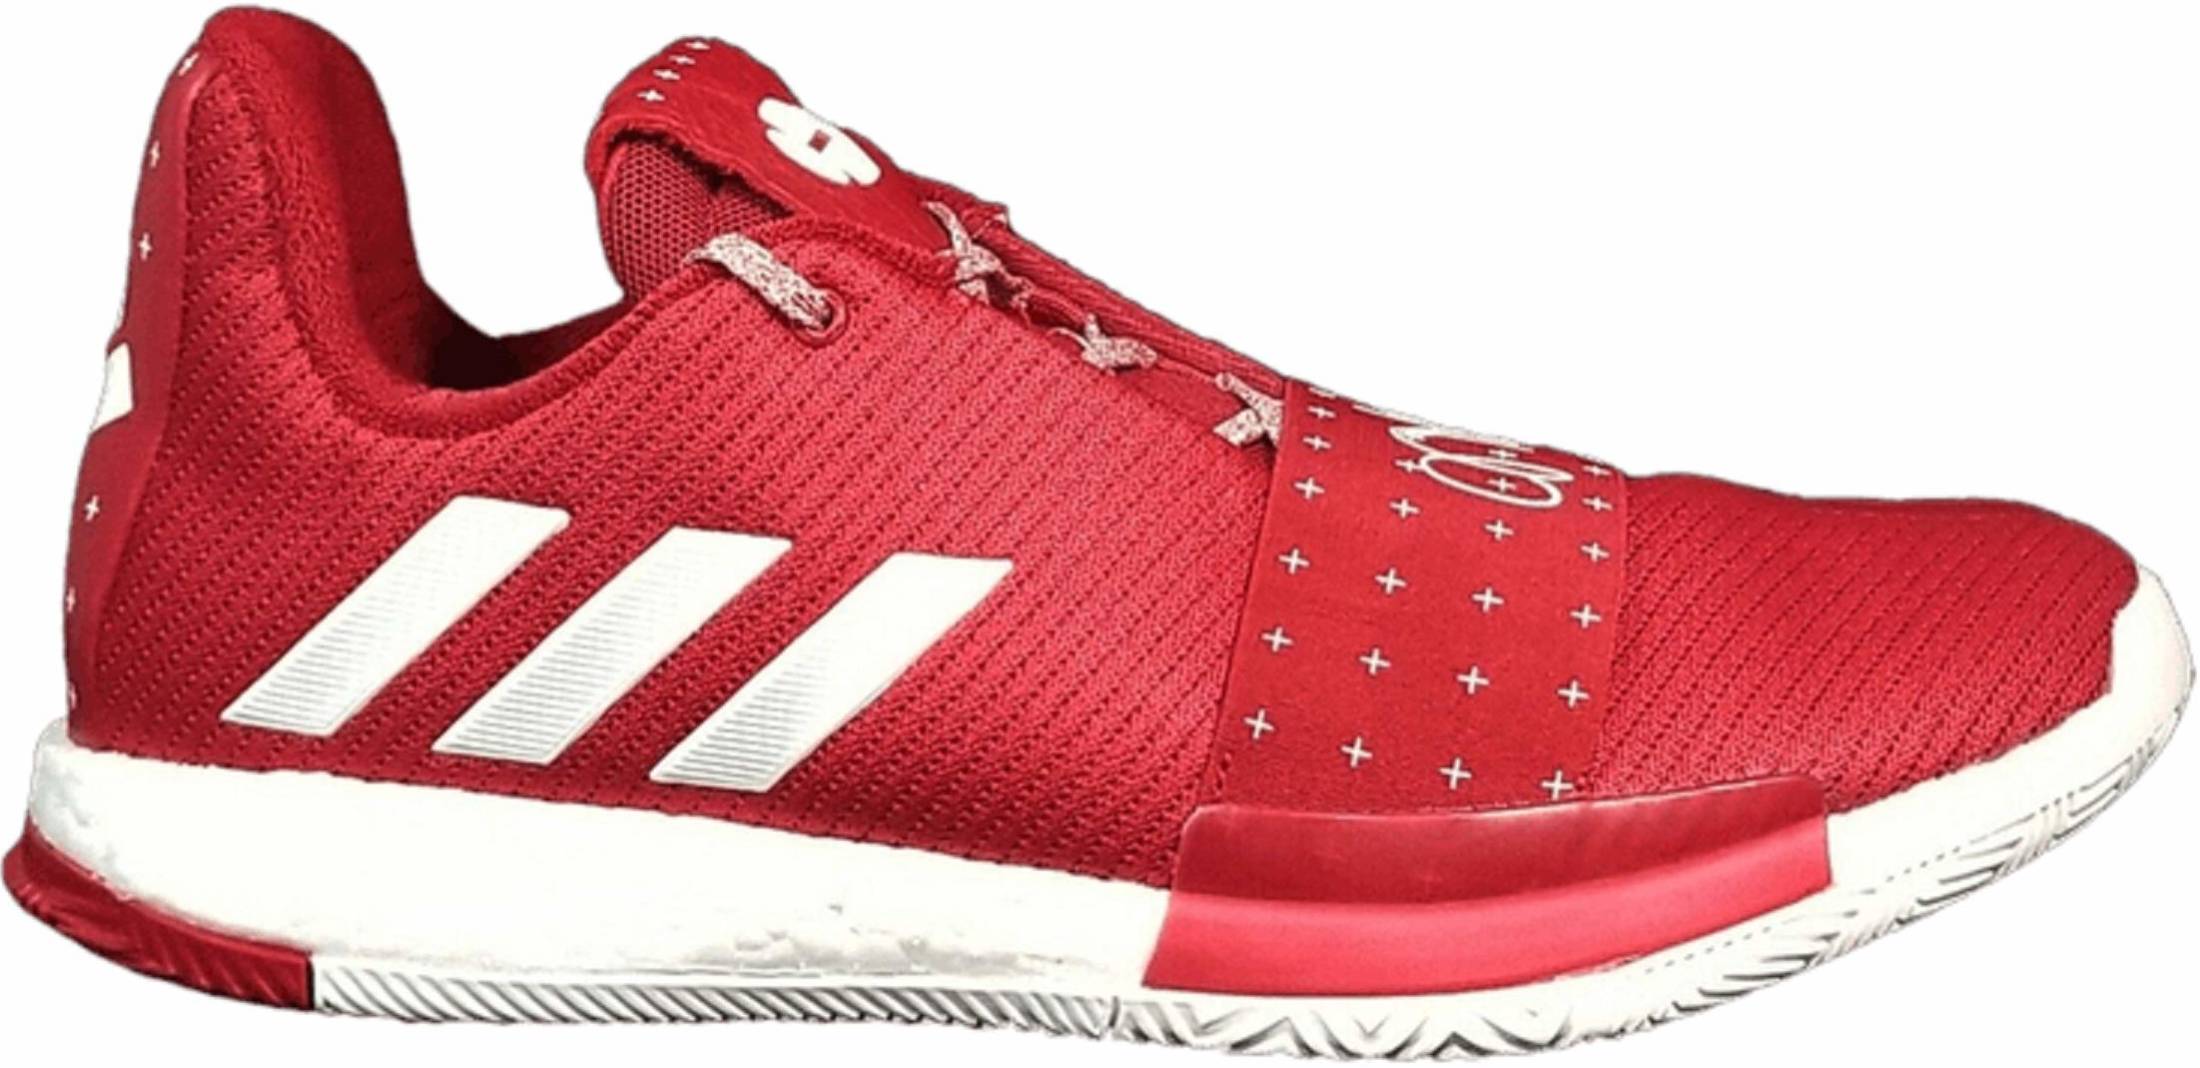 Save 56% on Adidas Low Basketball Shoes 